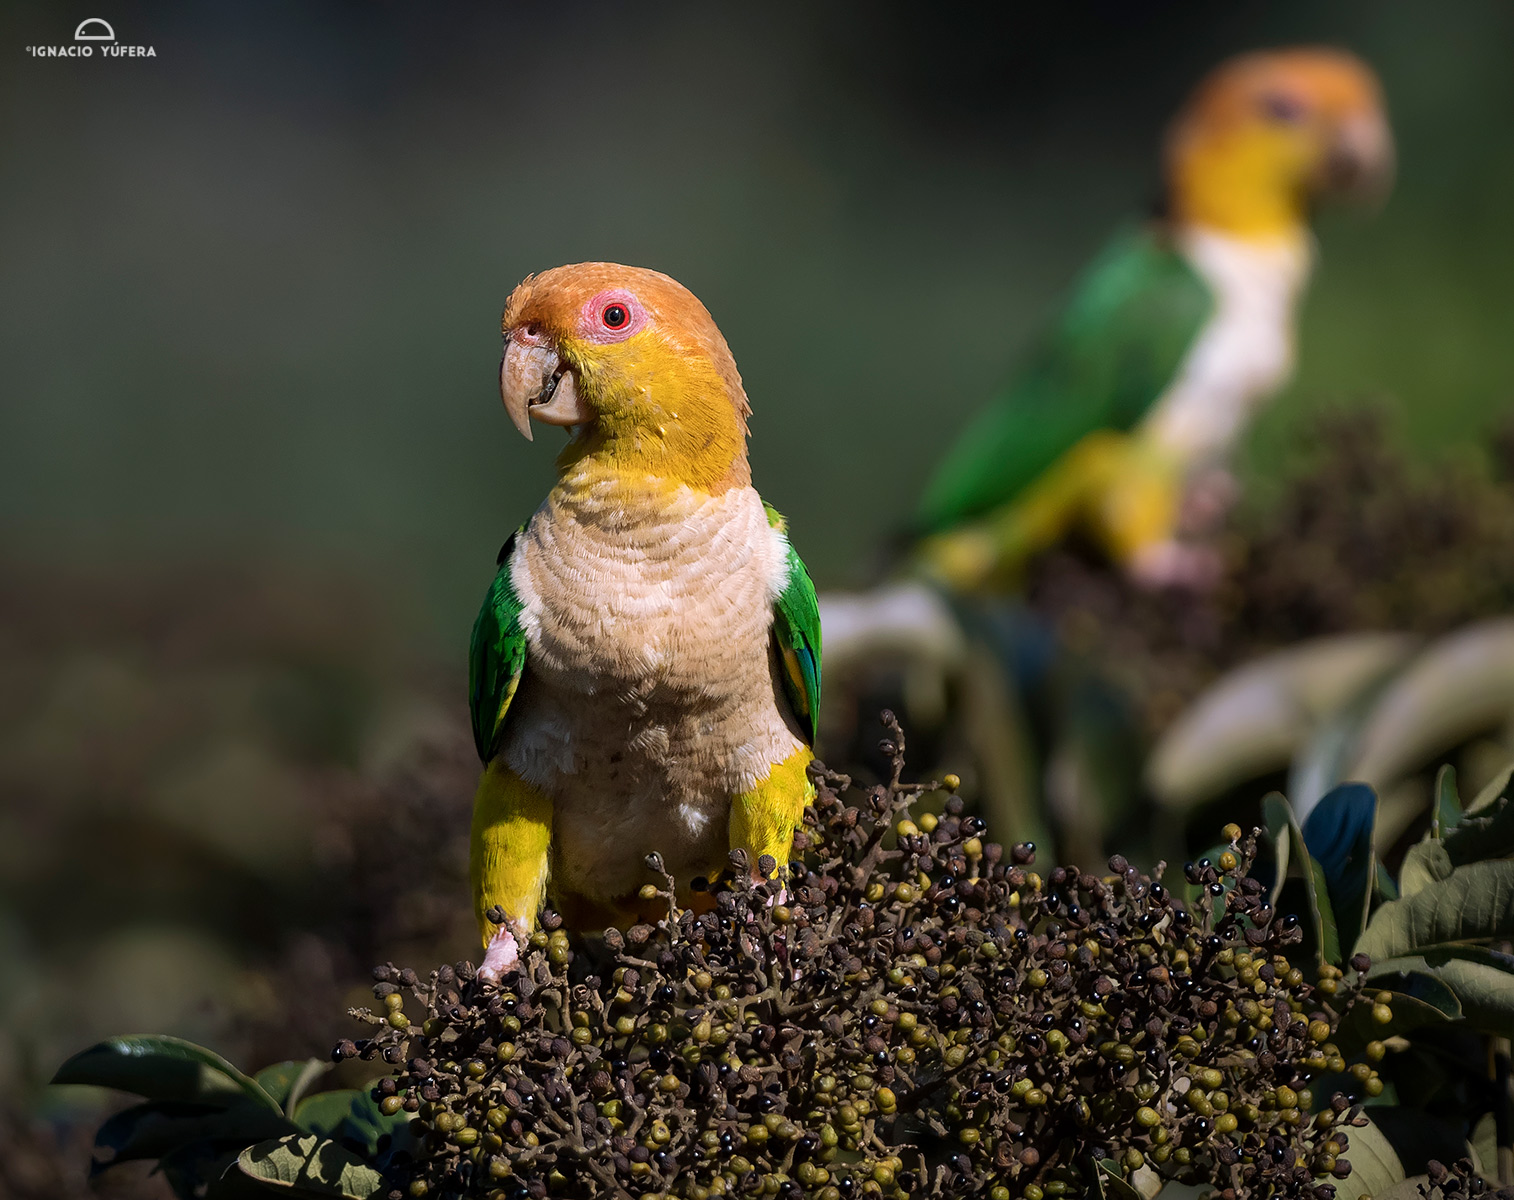 Yellow-tailed parrots